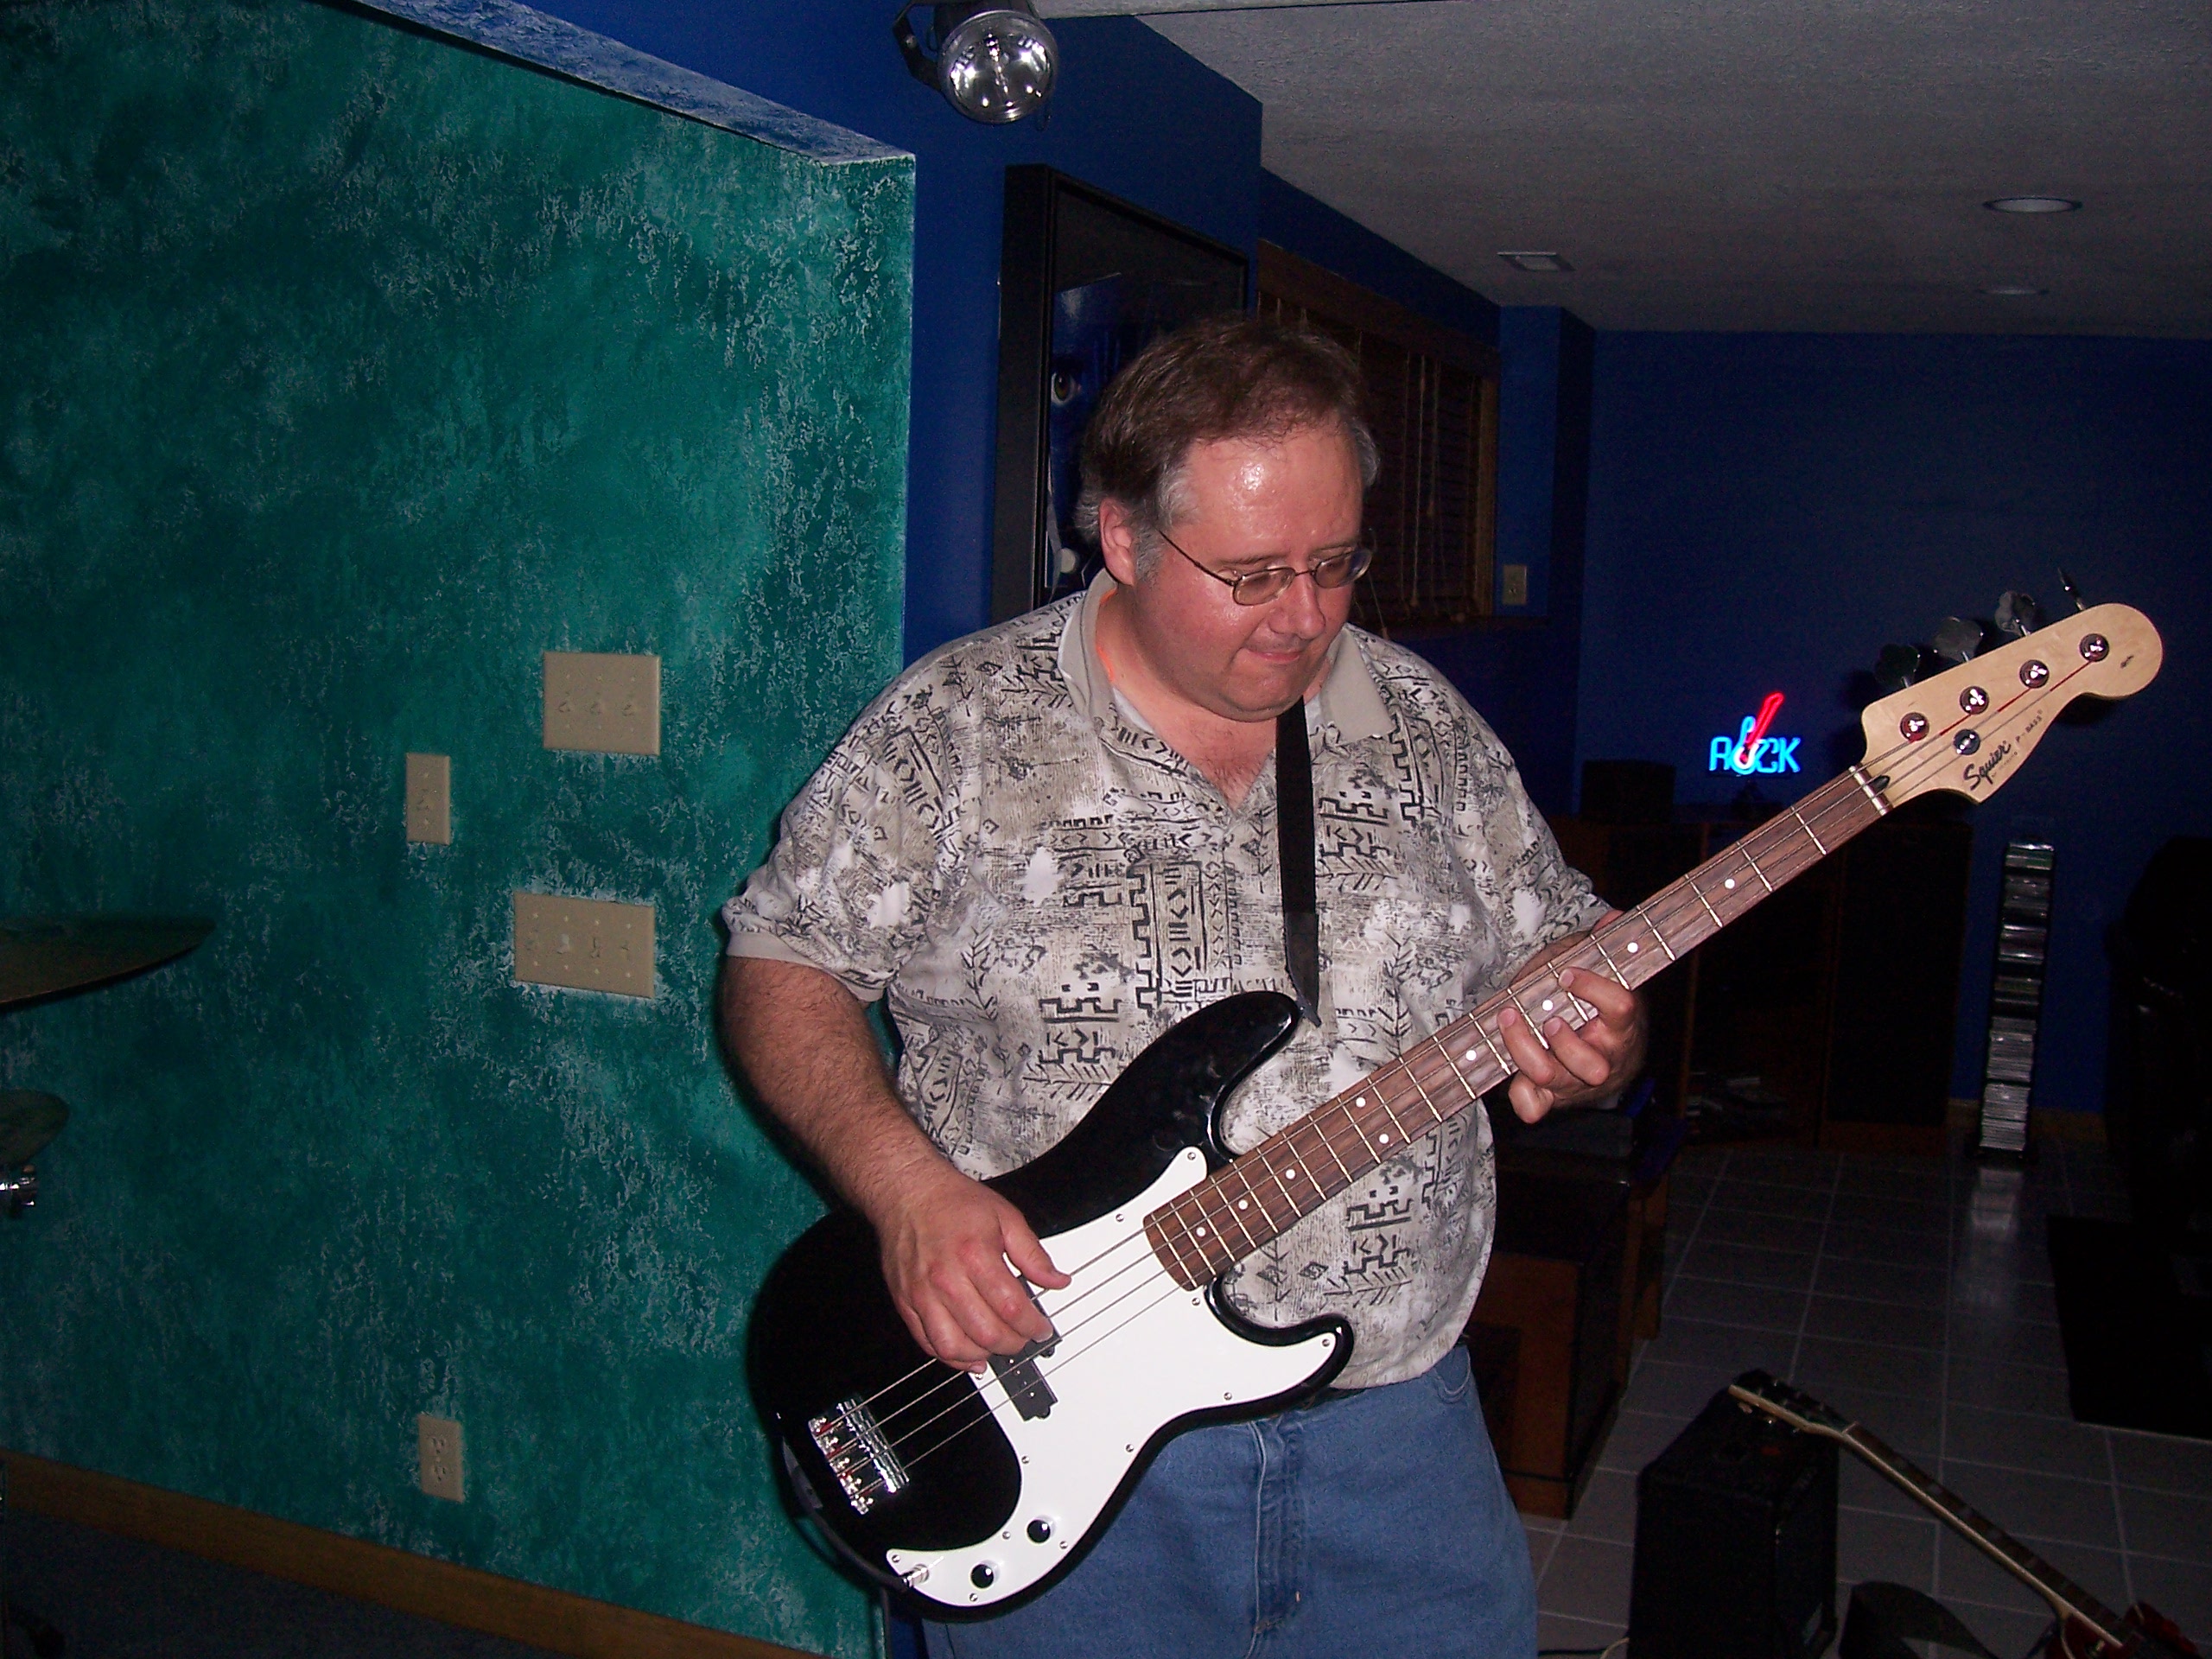 Dave on bass